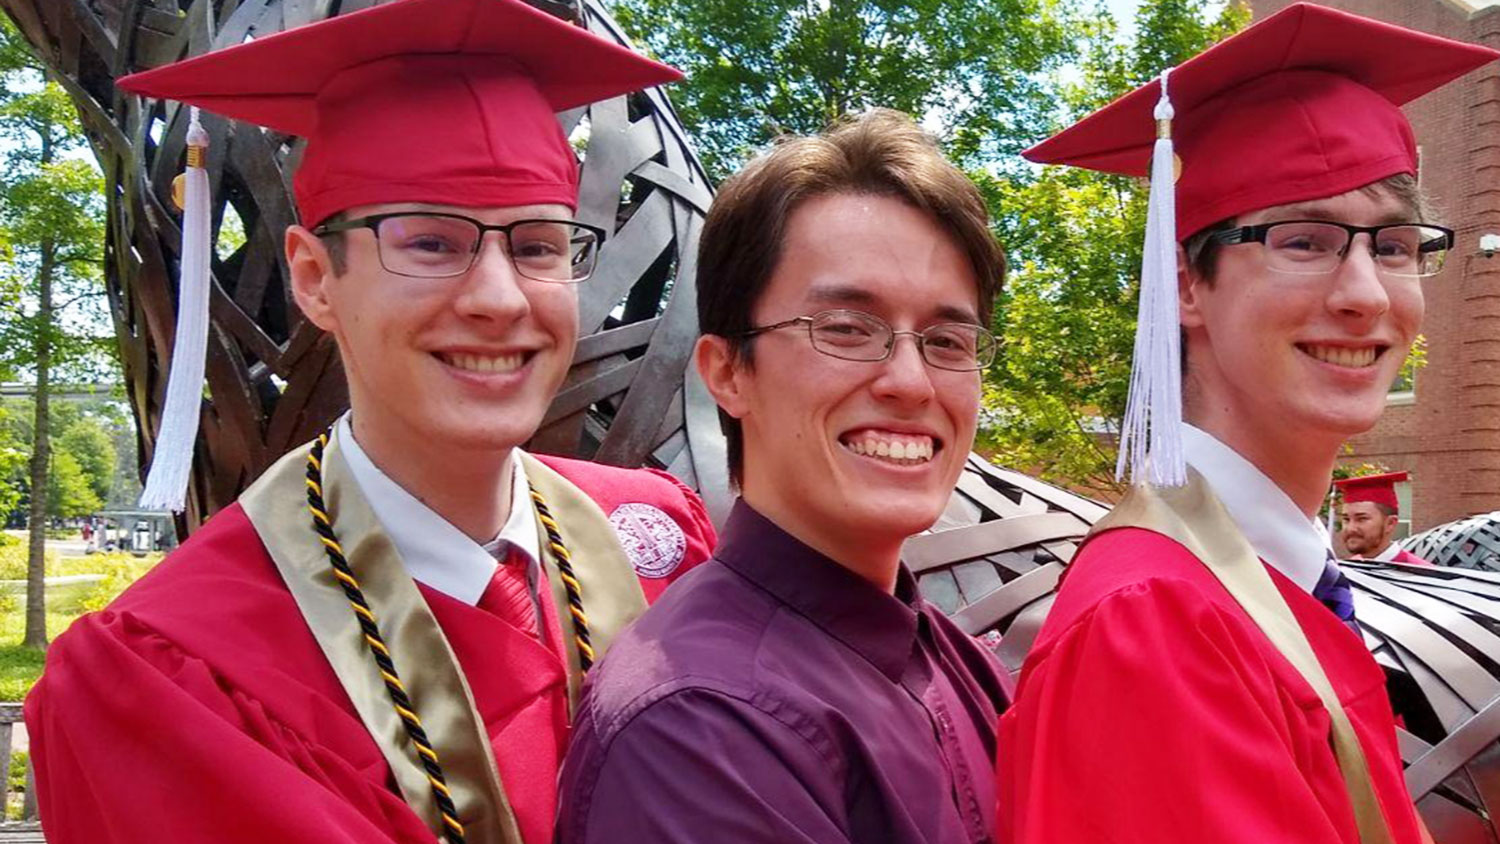 Poole College students Hayden and Evan Wood at commencement